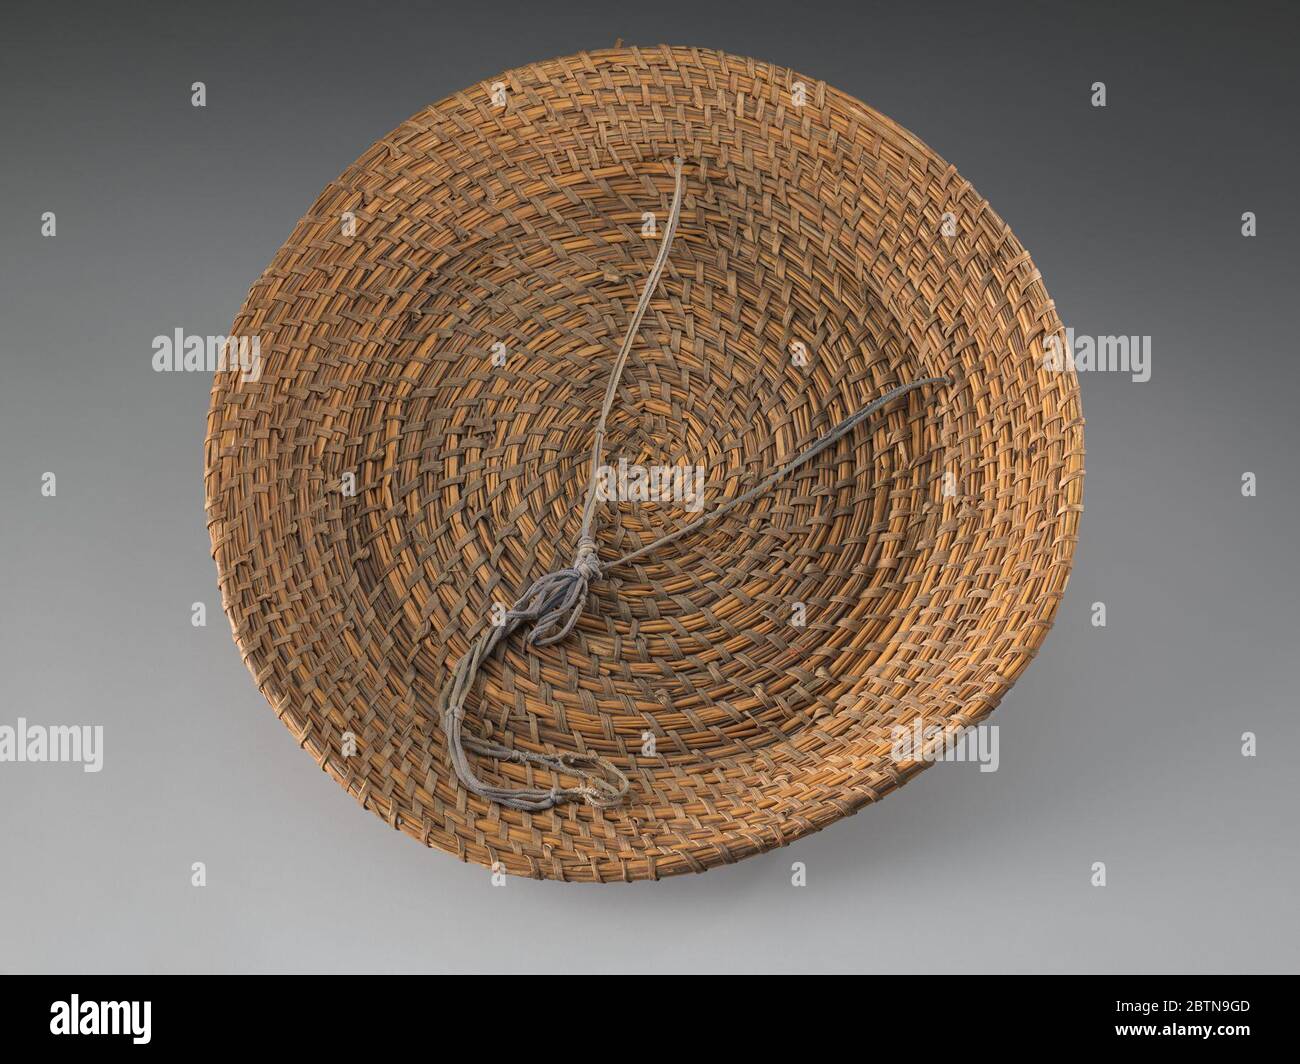 Rice fanner A rice fanner basket identified as being made by an enslaved person the South Carolina coast. The shallow, round shaped basket is made of reeds, rush